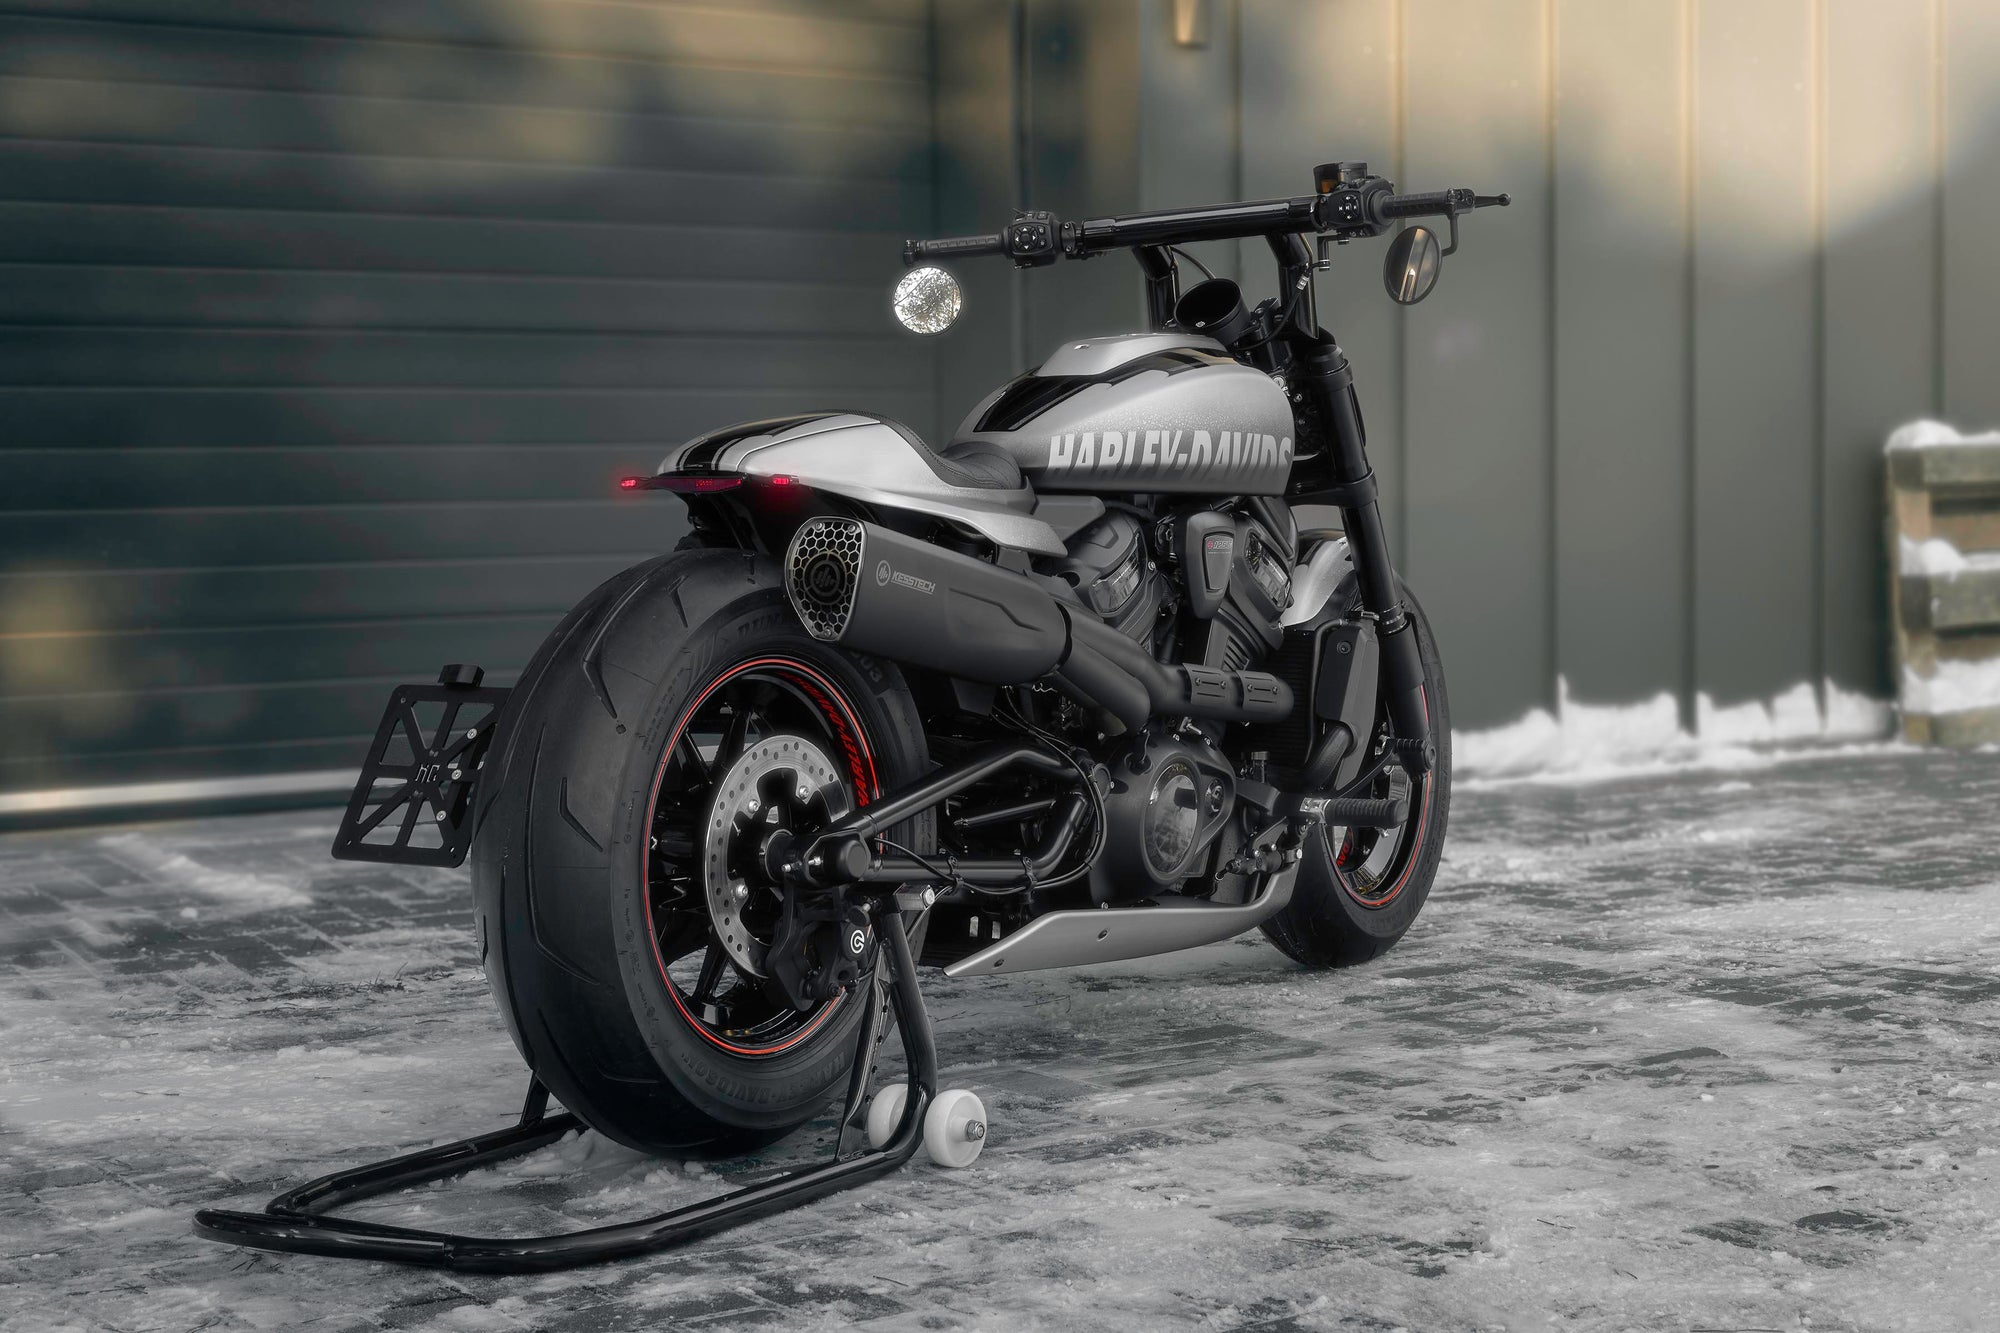 Modified Harley Davidson Sportster S motorcycle with Killer Custom parts from the side outside with some visible snow and a modern garage in the background